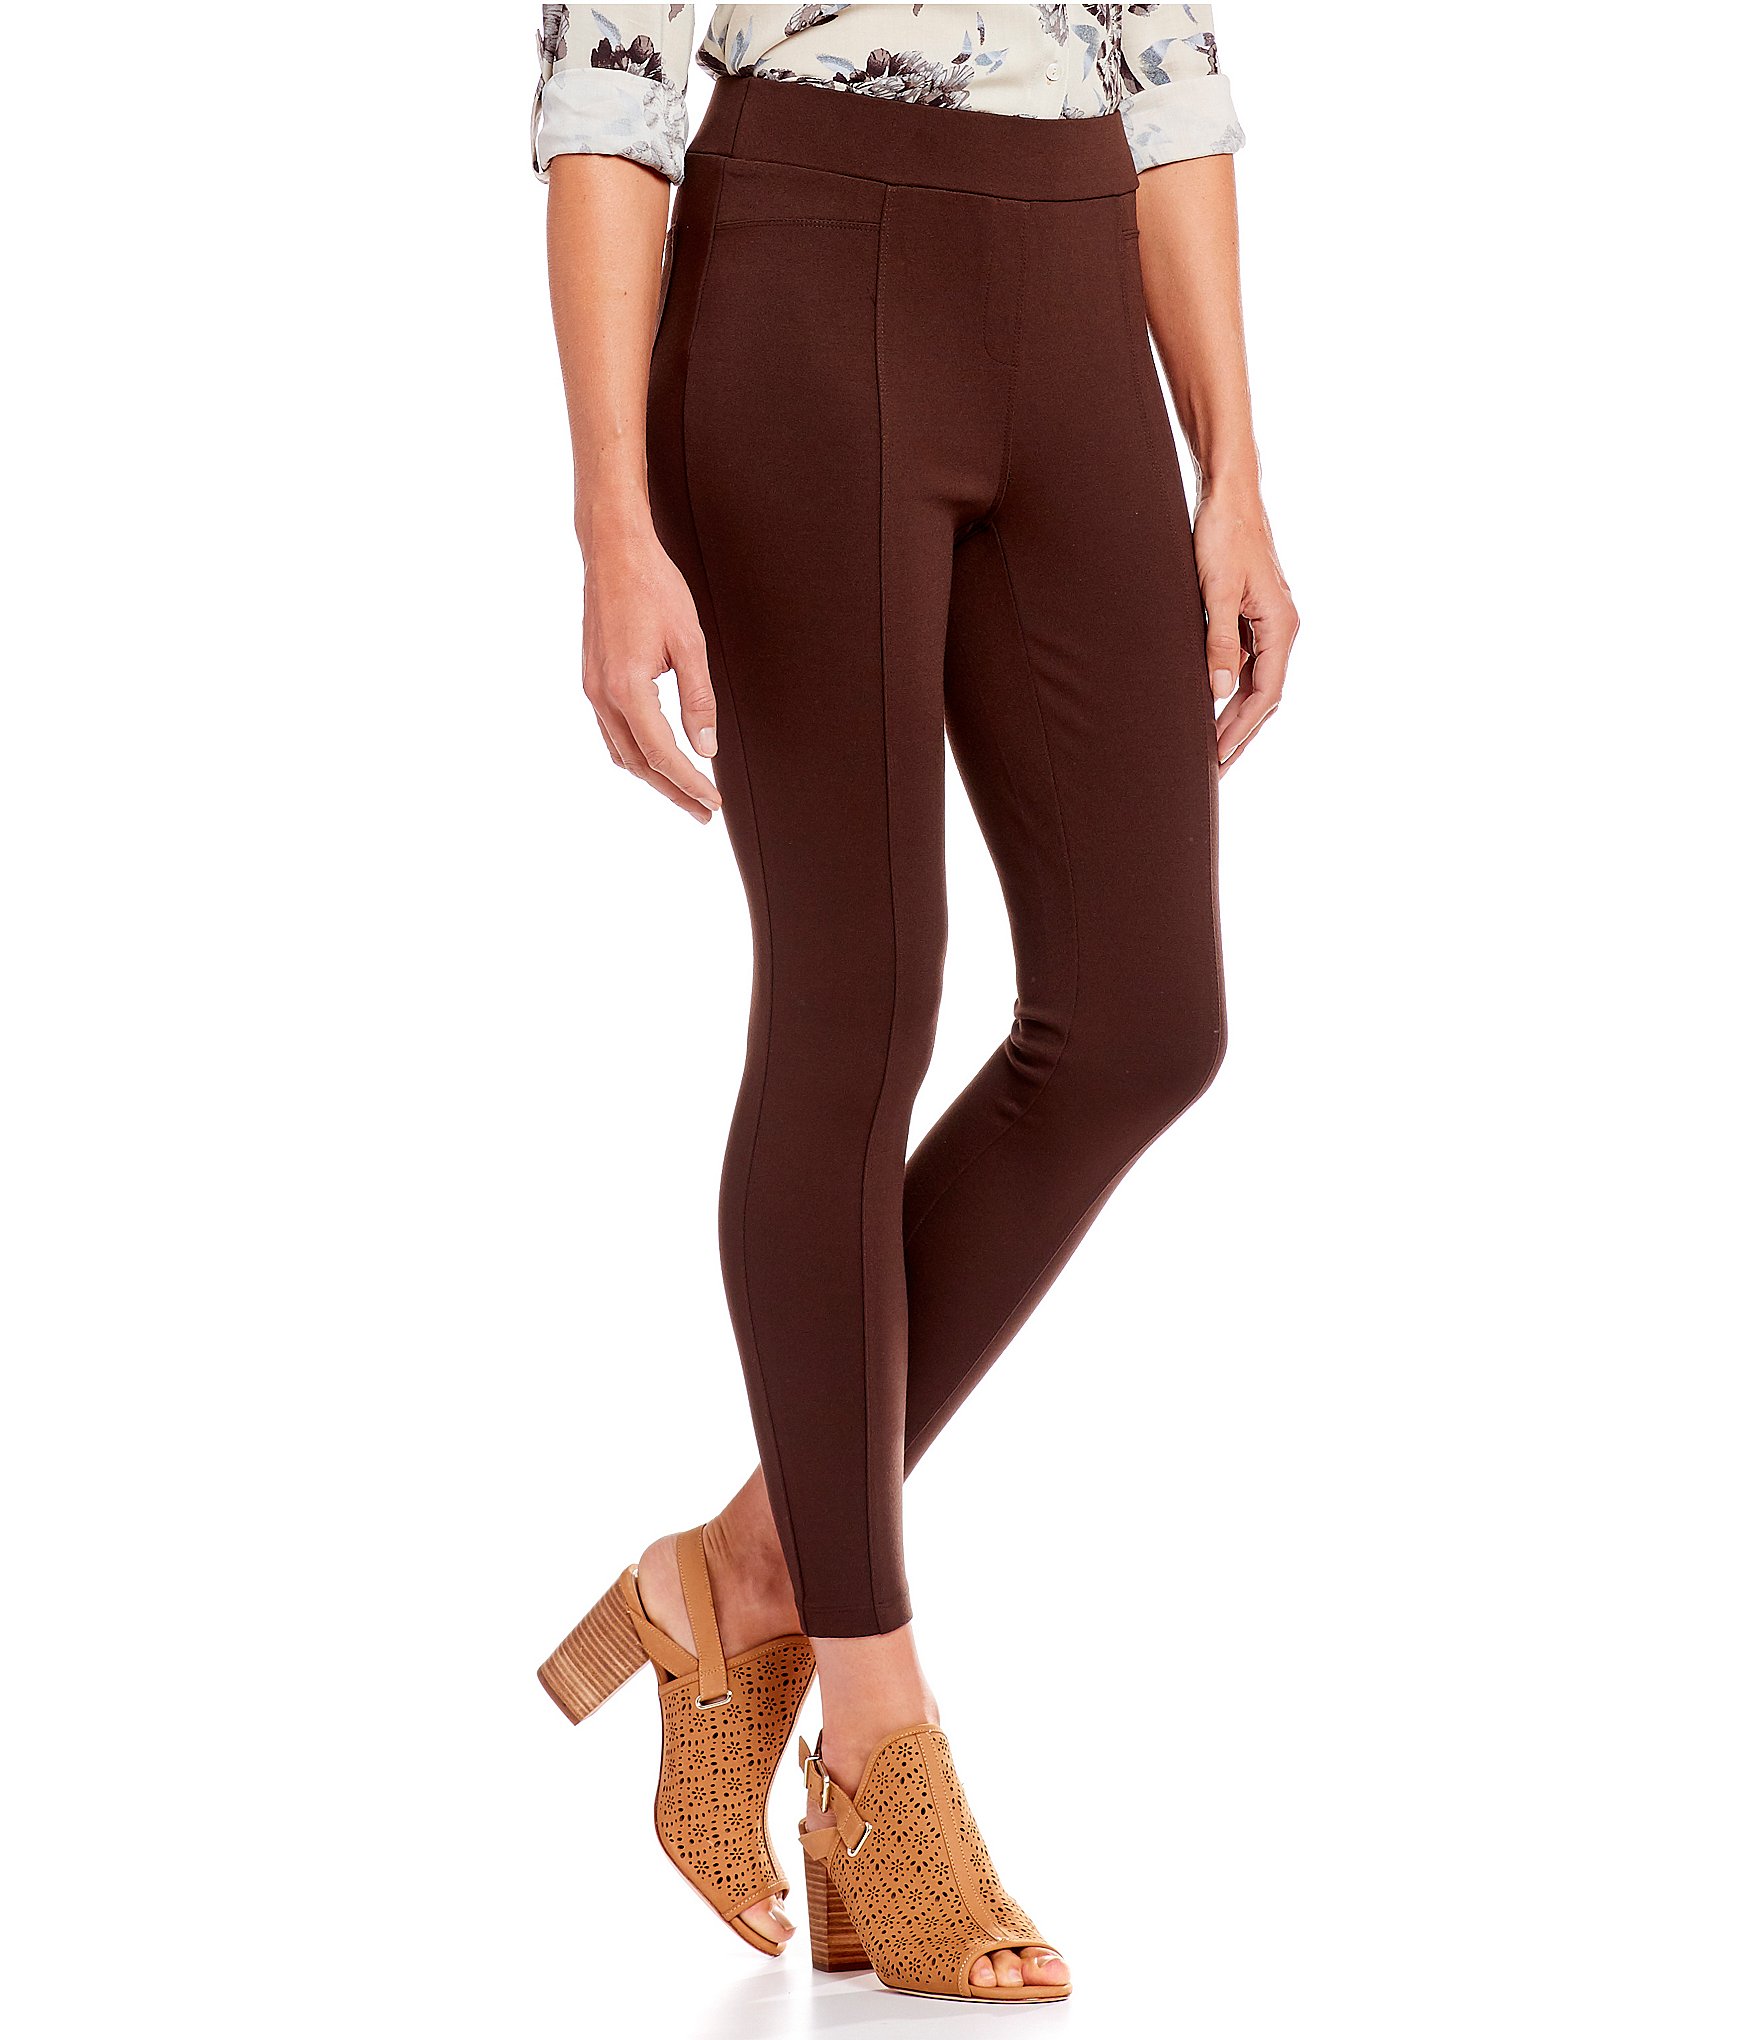 Leggings Petite for Women (height up to 163 cm) E-store repinpeace